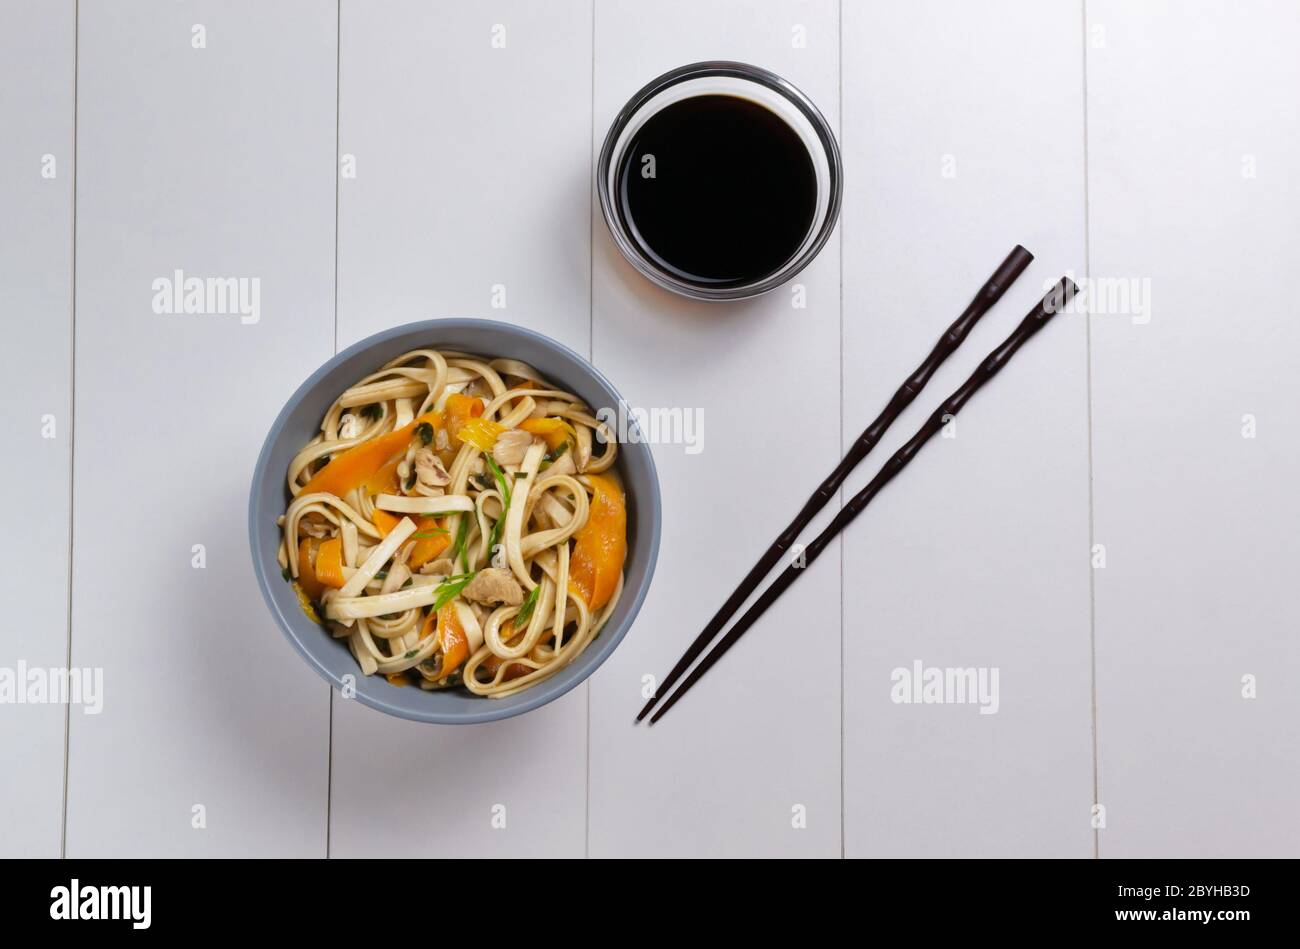 Udon noodles with chicken, soy sauce and bamboo sticks on a white plate. Top view. Japanese cuisine. Stock Photo